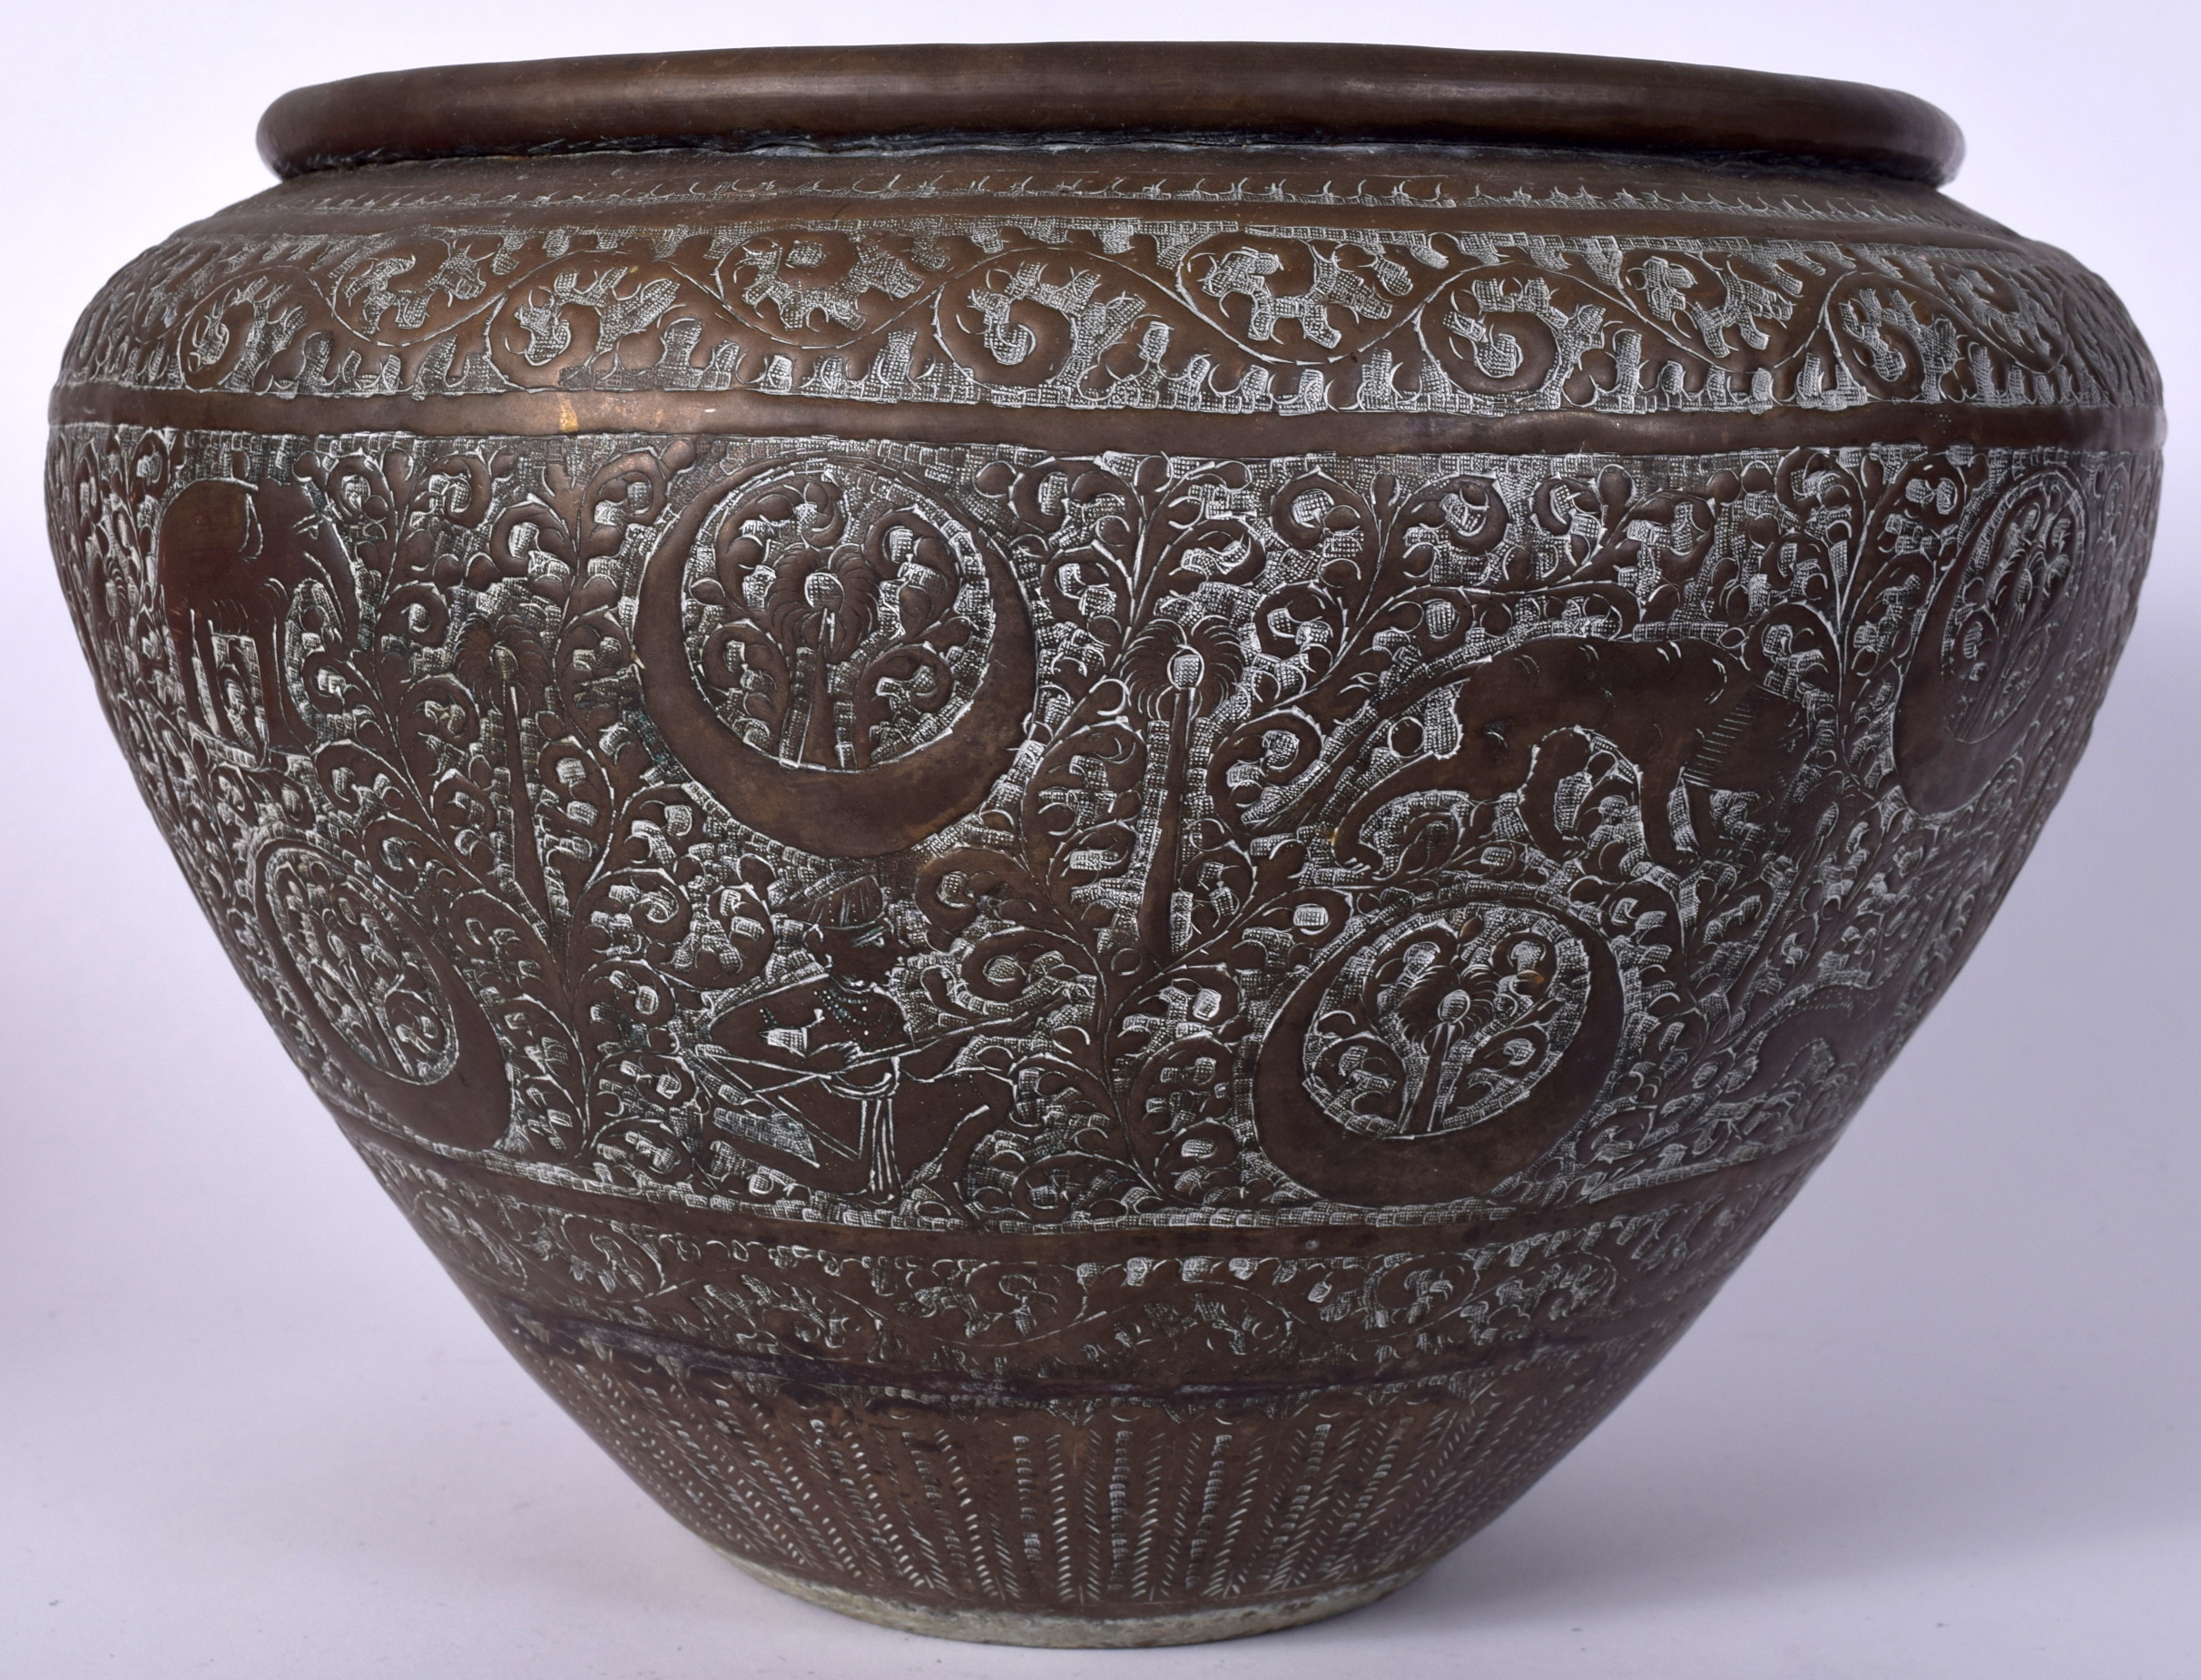 A LARGE 19TH CENTURY INDIAN BRONZE VASE JARDINIERE, decorated in relief with figures and animals am - Image 2 of 4